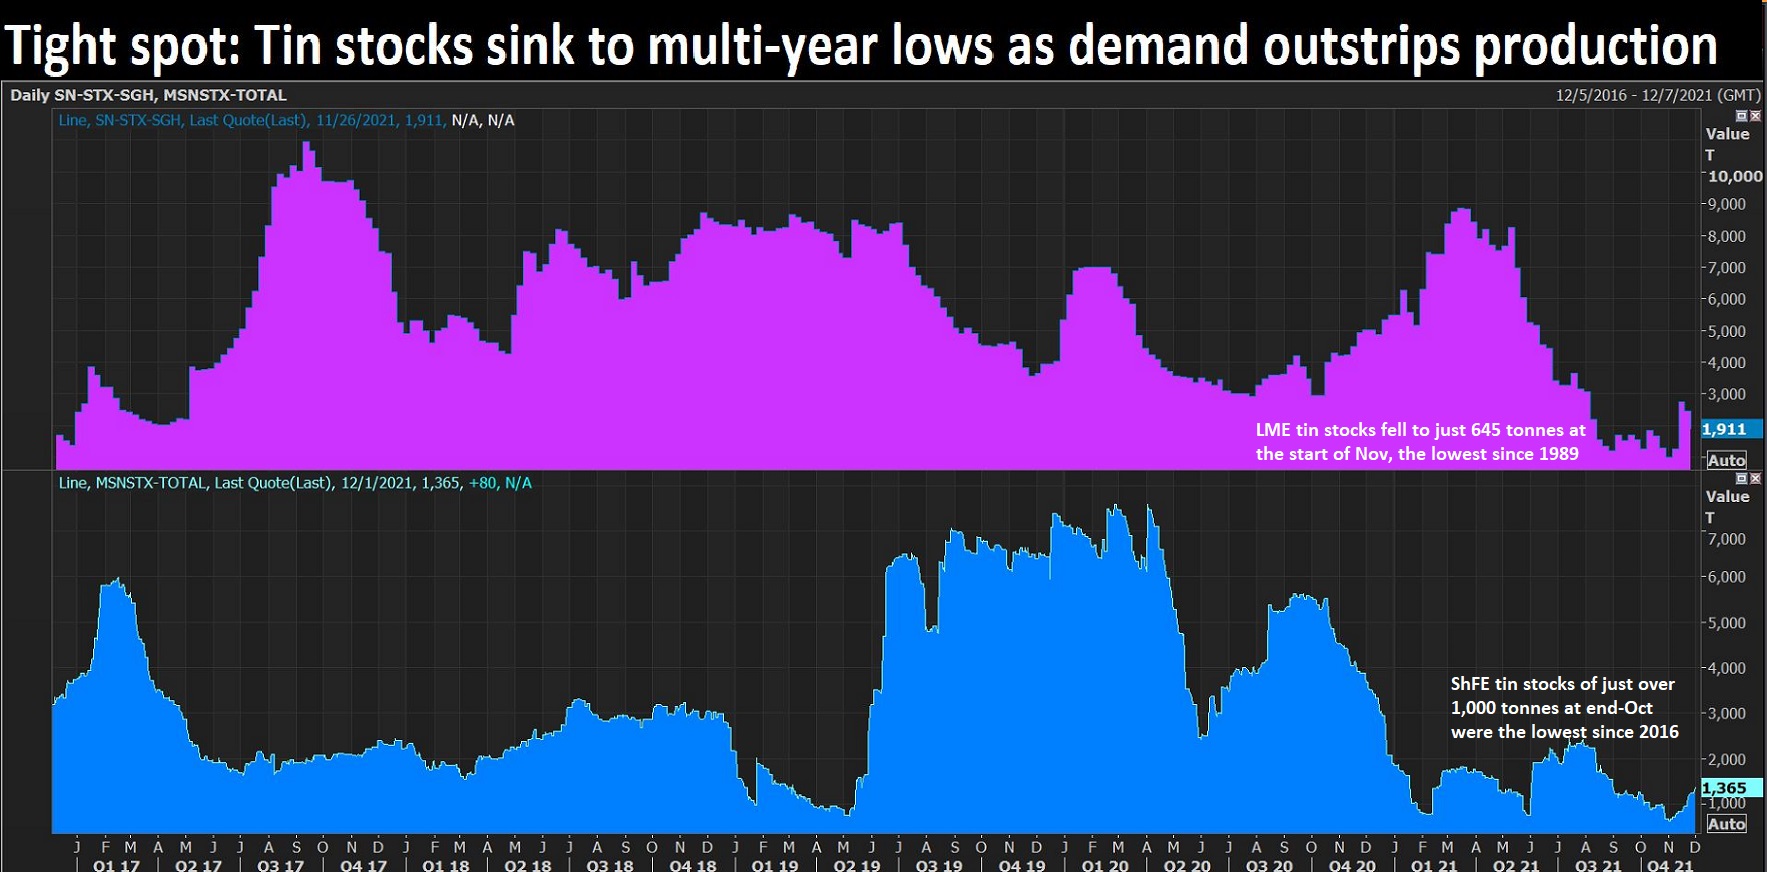 Tin stocks fall to multi-year lows as demand outstrips production